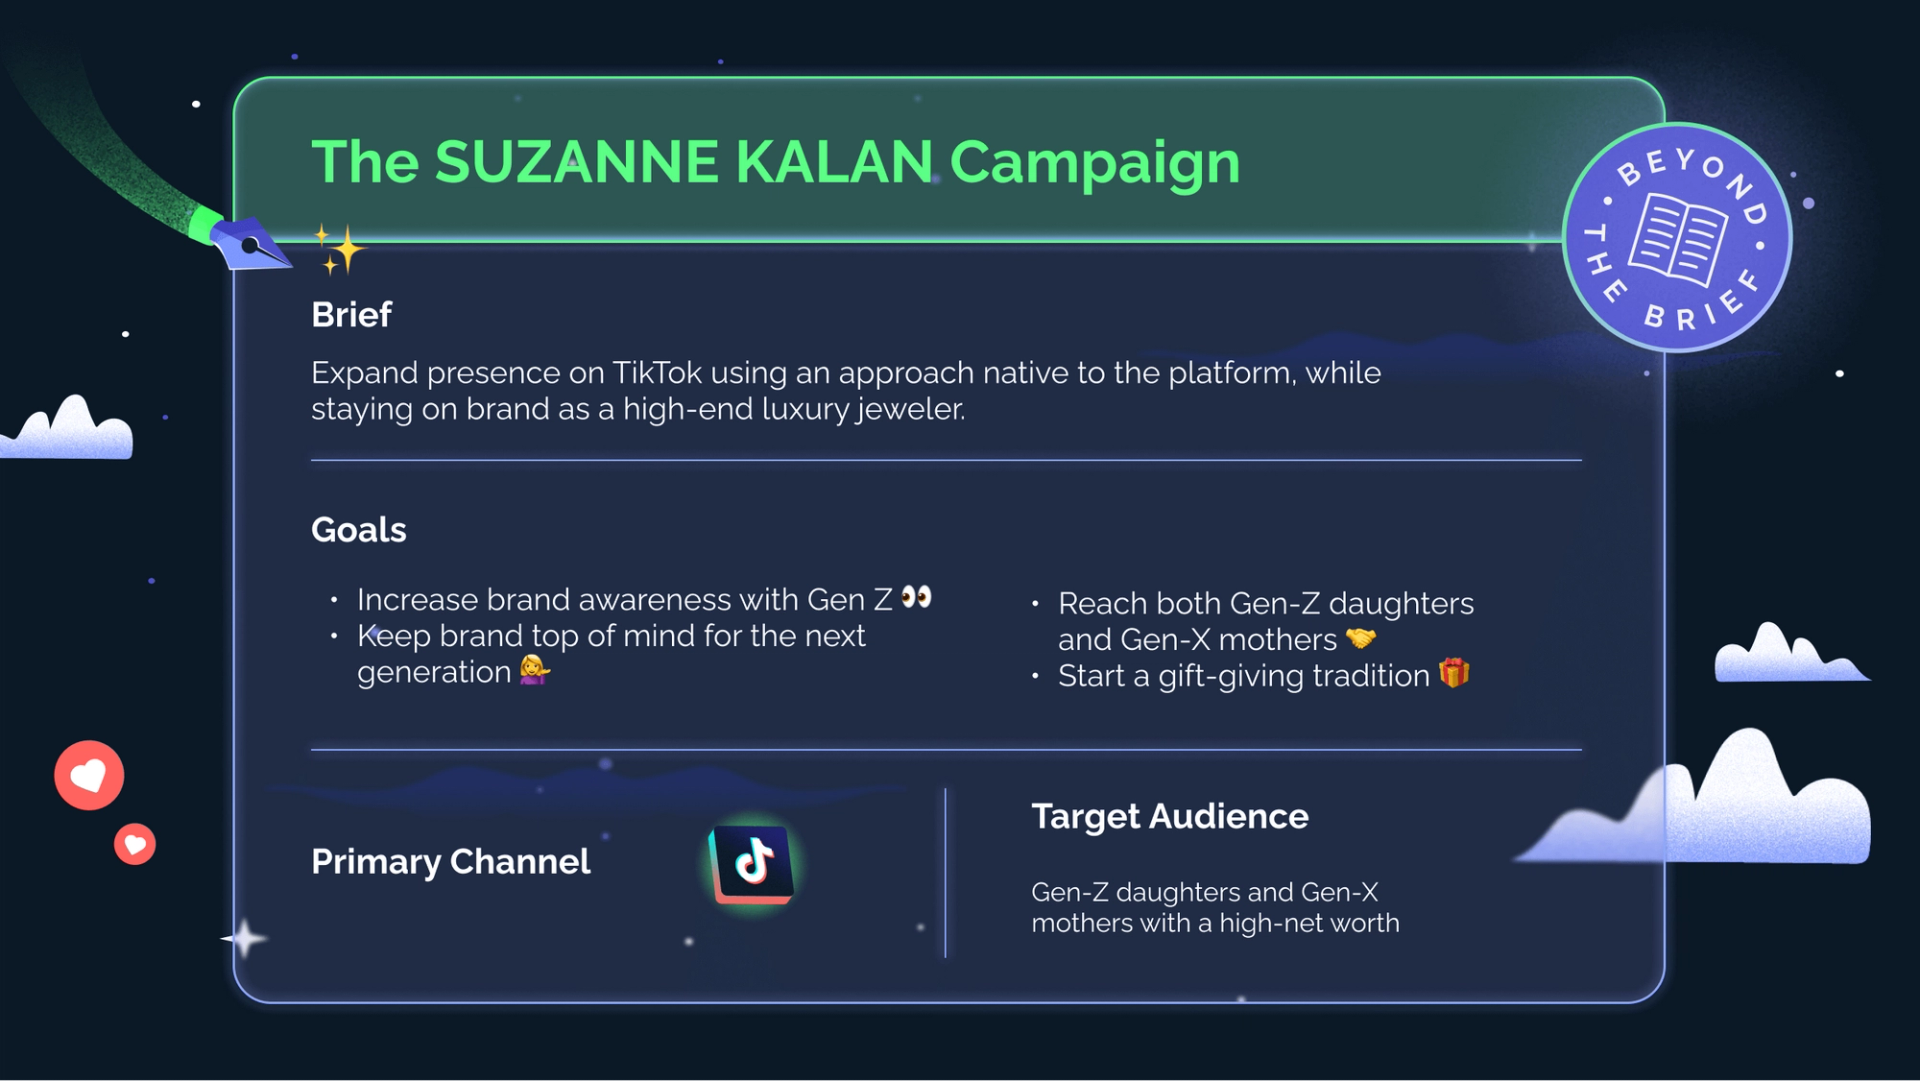 The SUZANNE KALAN Campaign